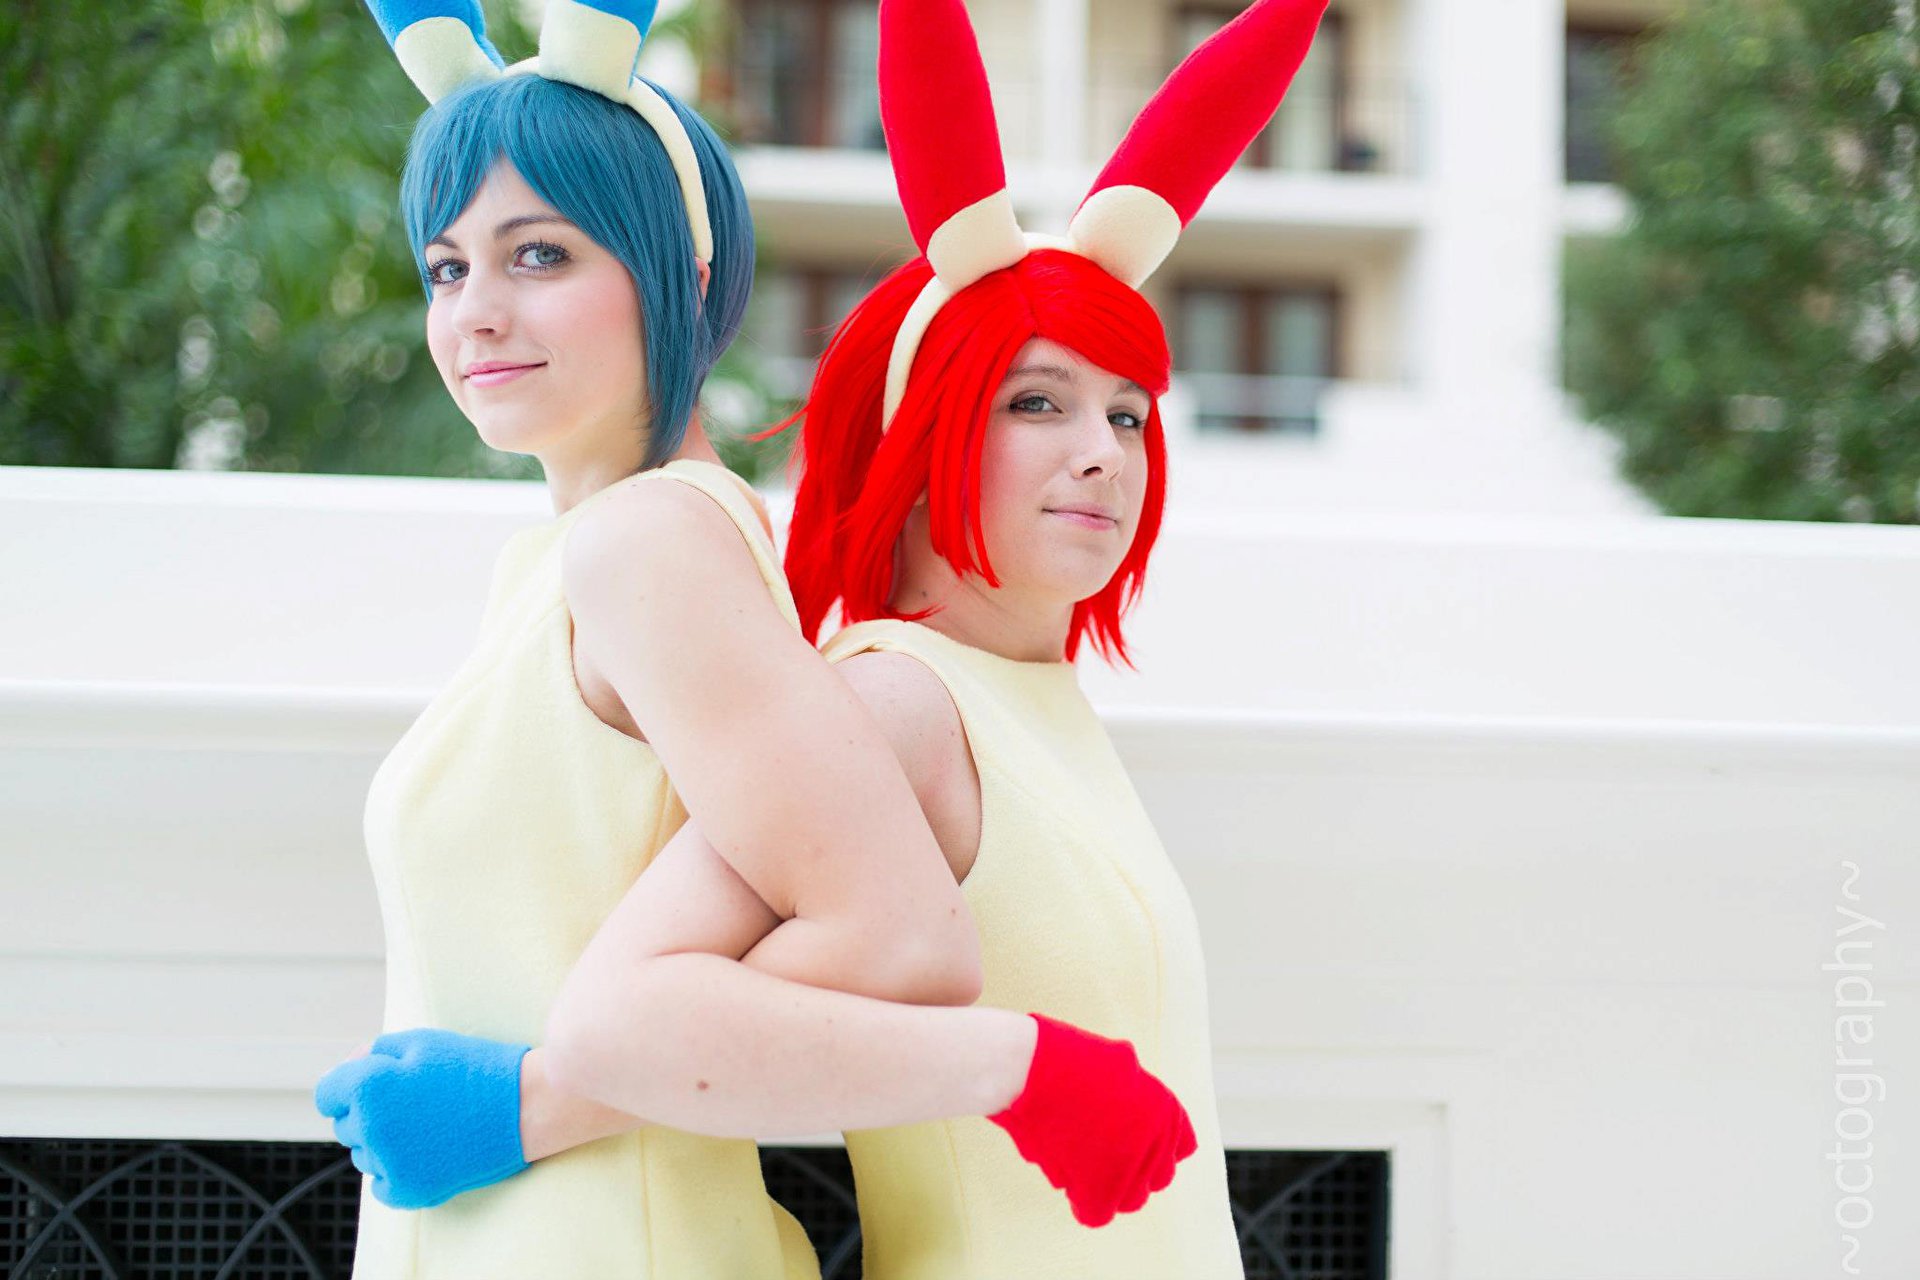 Cospix.net photo featuring Octography and Brie-chan Cosplay